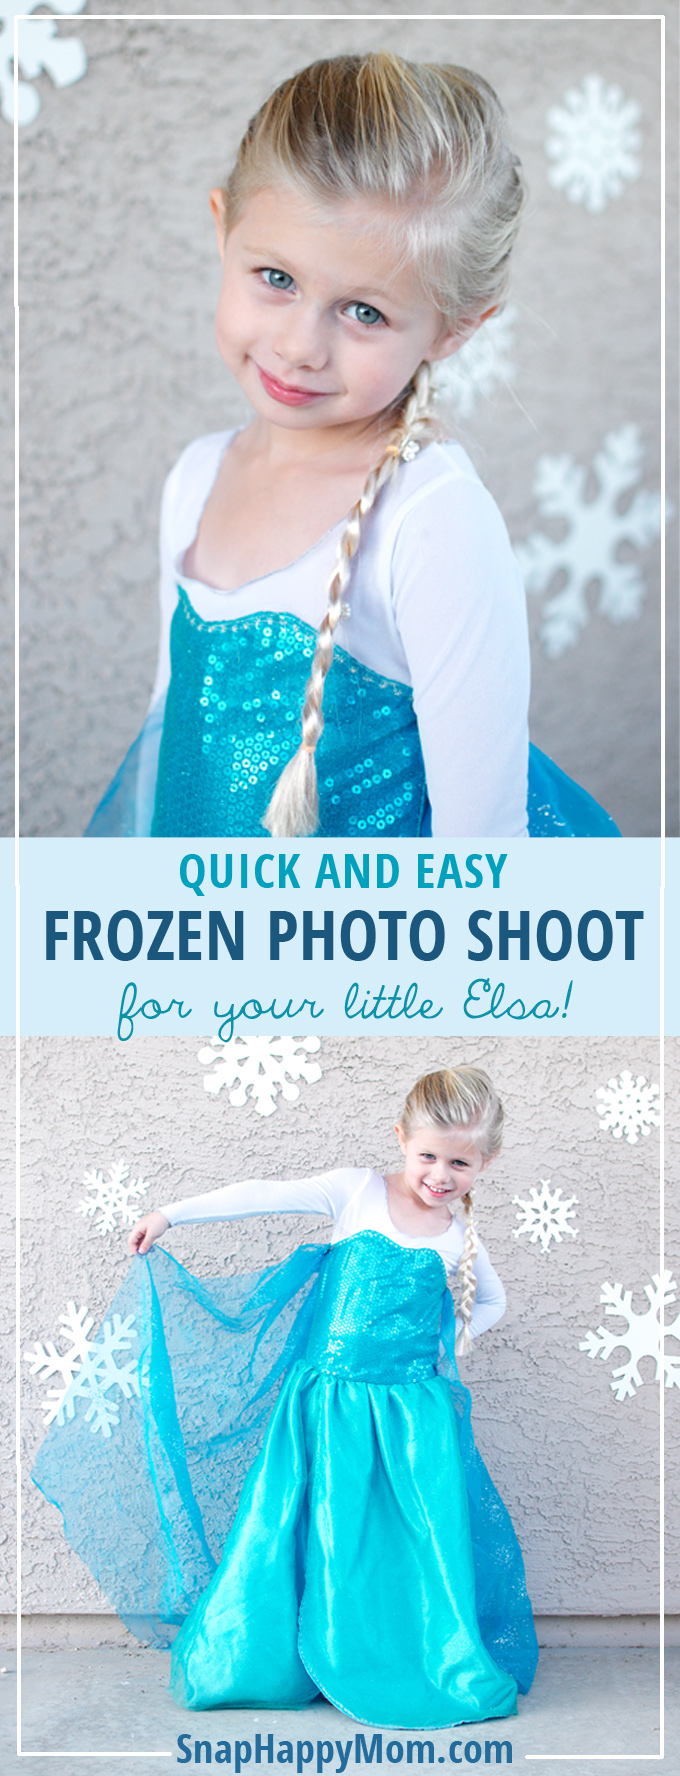 Quick and Easy Frozen Photo Shoot - Here's how you can painlessly create a Frozen-inspired area in less than ten minutes to take some pictures of a little Elsa. It's quick, easy, and cheap...but it adds just the right amount of special to that photo! - from SnapHappyMom.com